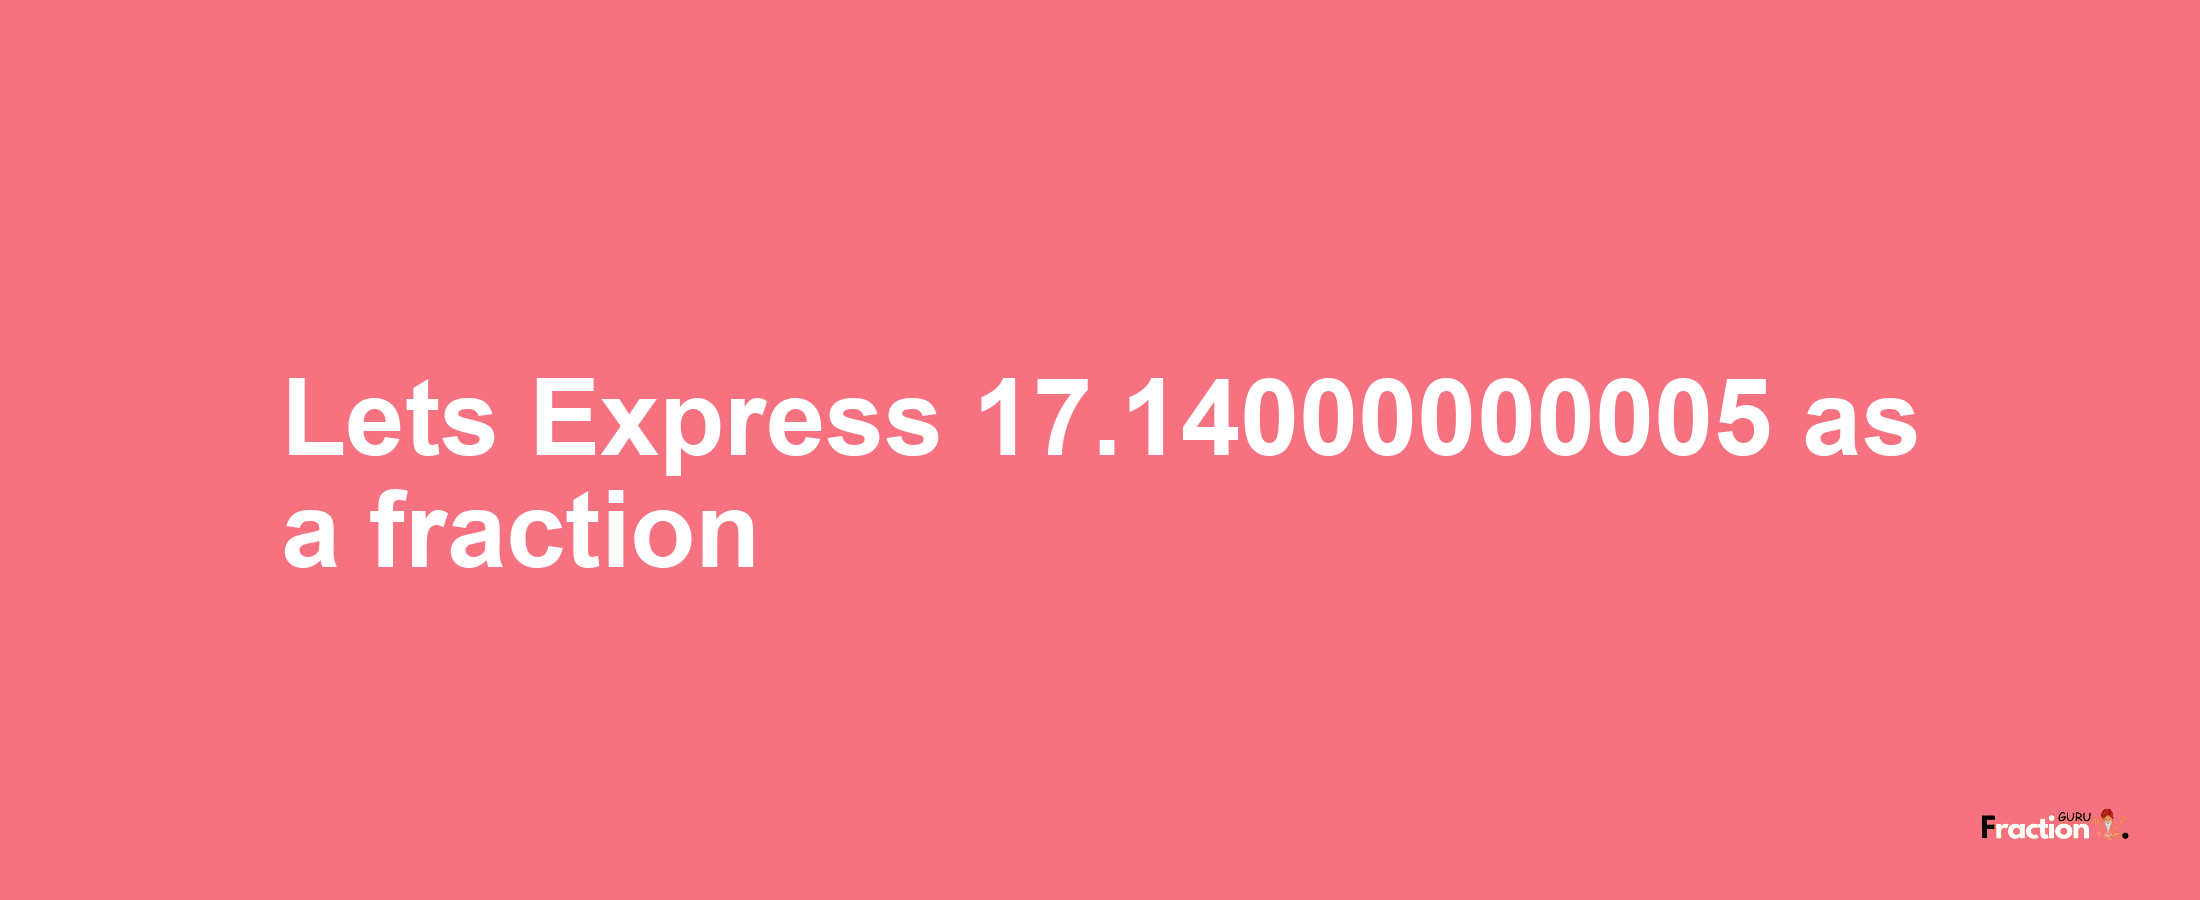 Lets Express 17.14000000005 as afraction